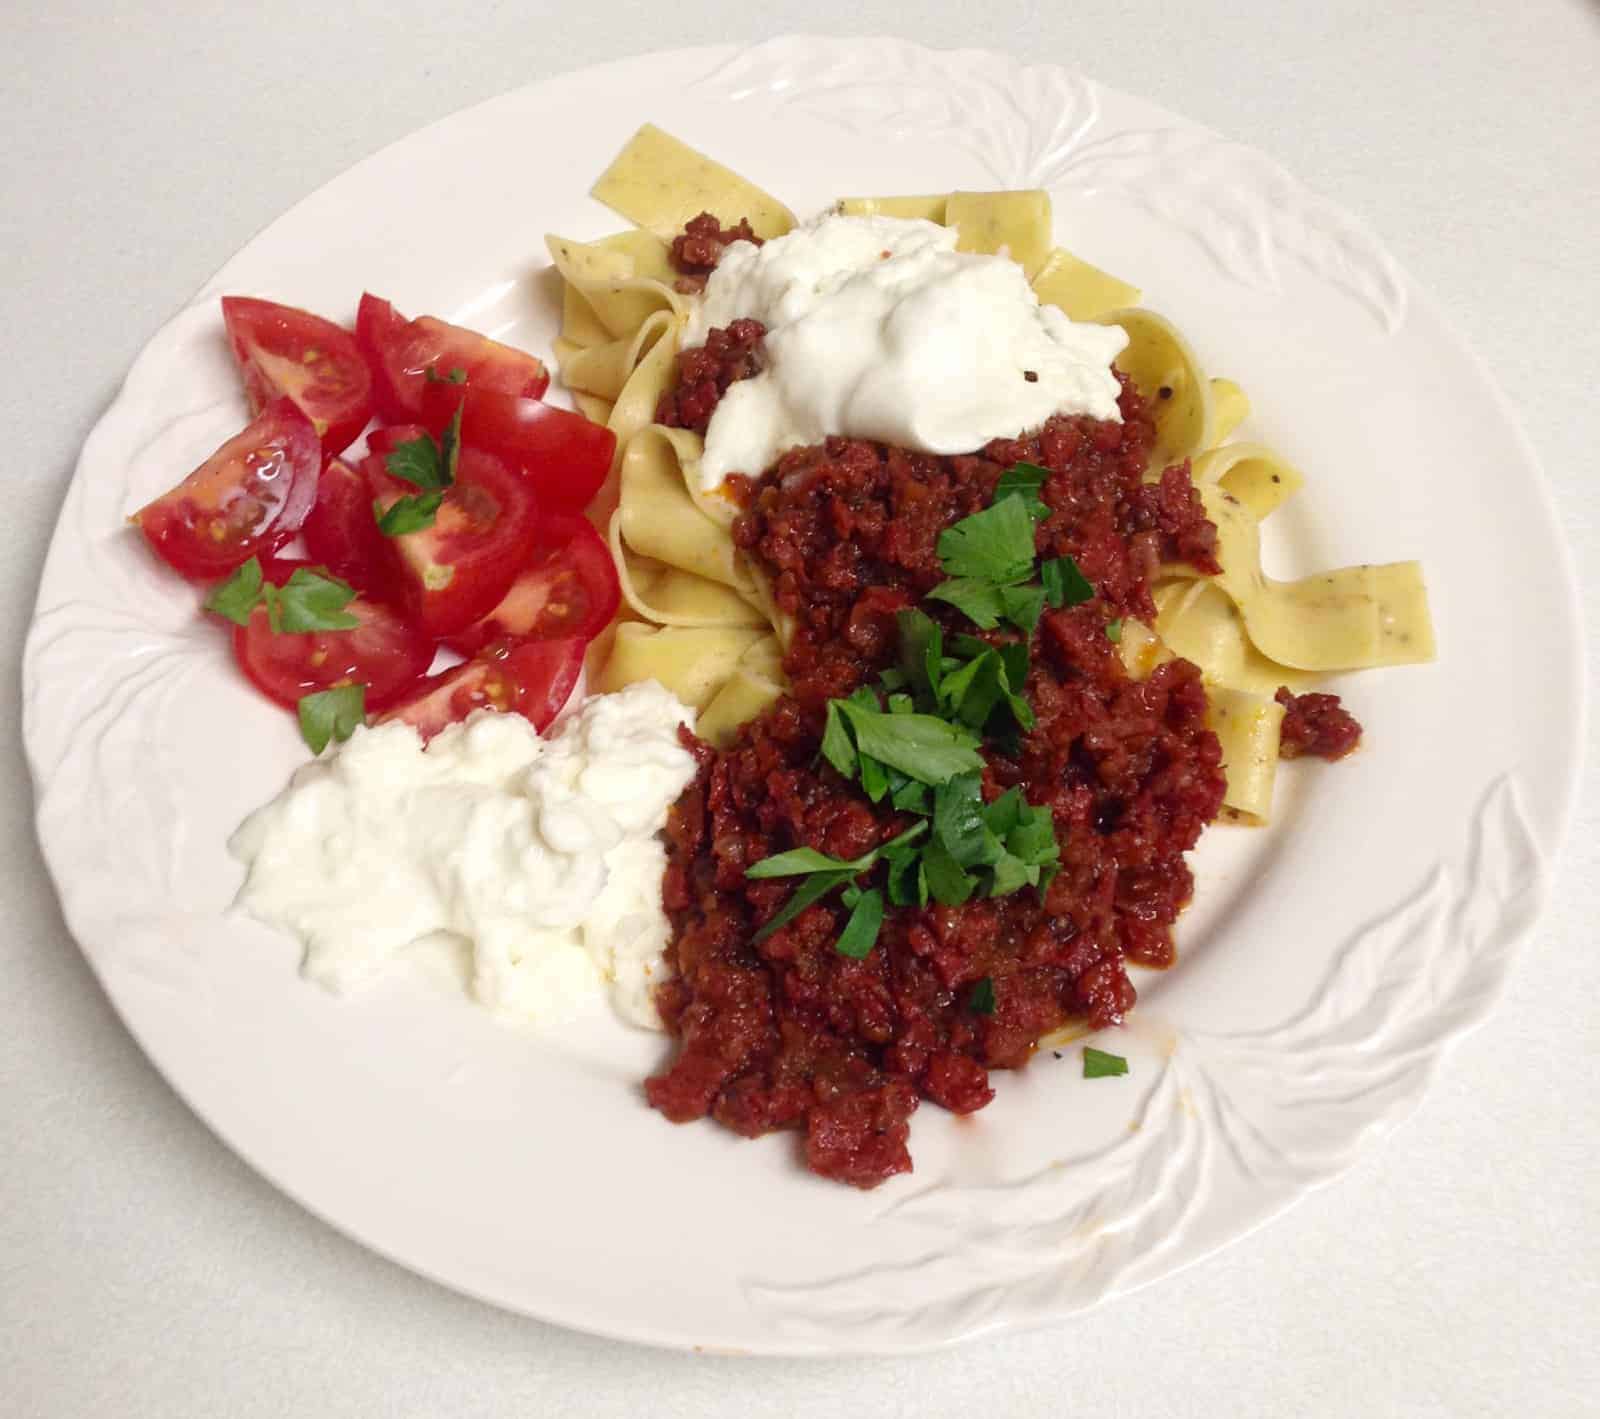 The World’s Fastest Pasta Sauce? Chorizo "Bolognese" with Buffalo Mozzarella adapted from Donna Hay